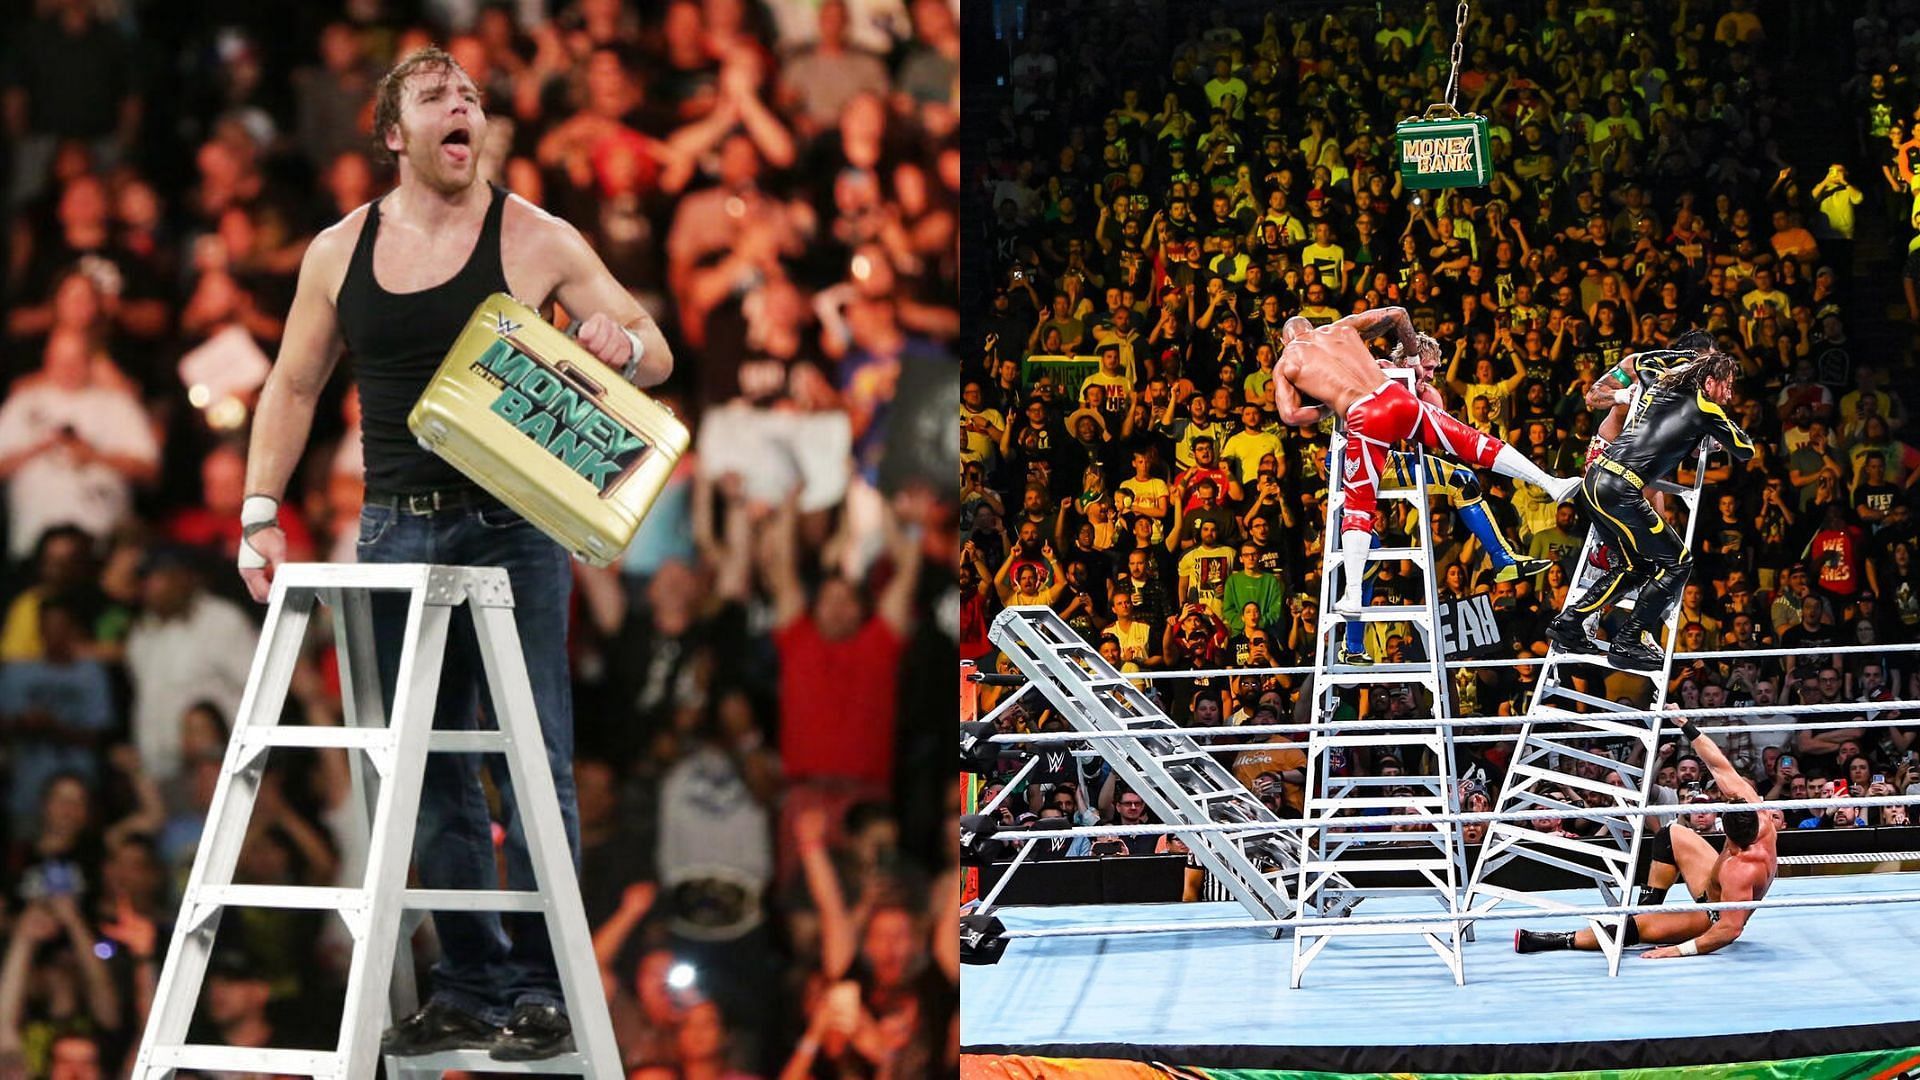 The Money in the Bank match is one of the most iconic match types in WWE history [Photos courtesy of WWE